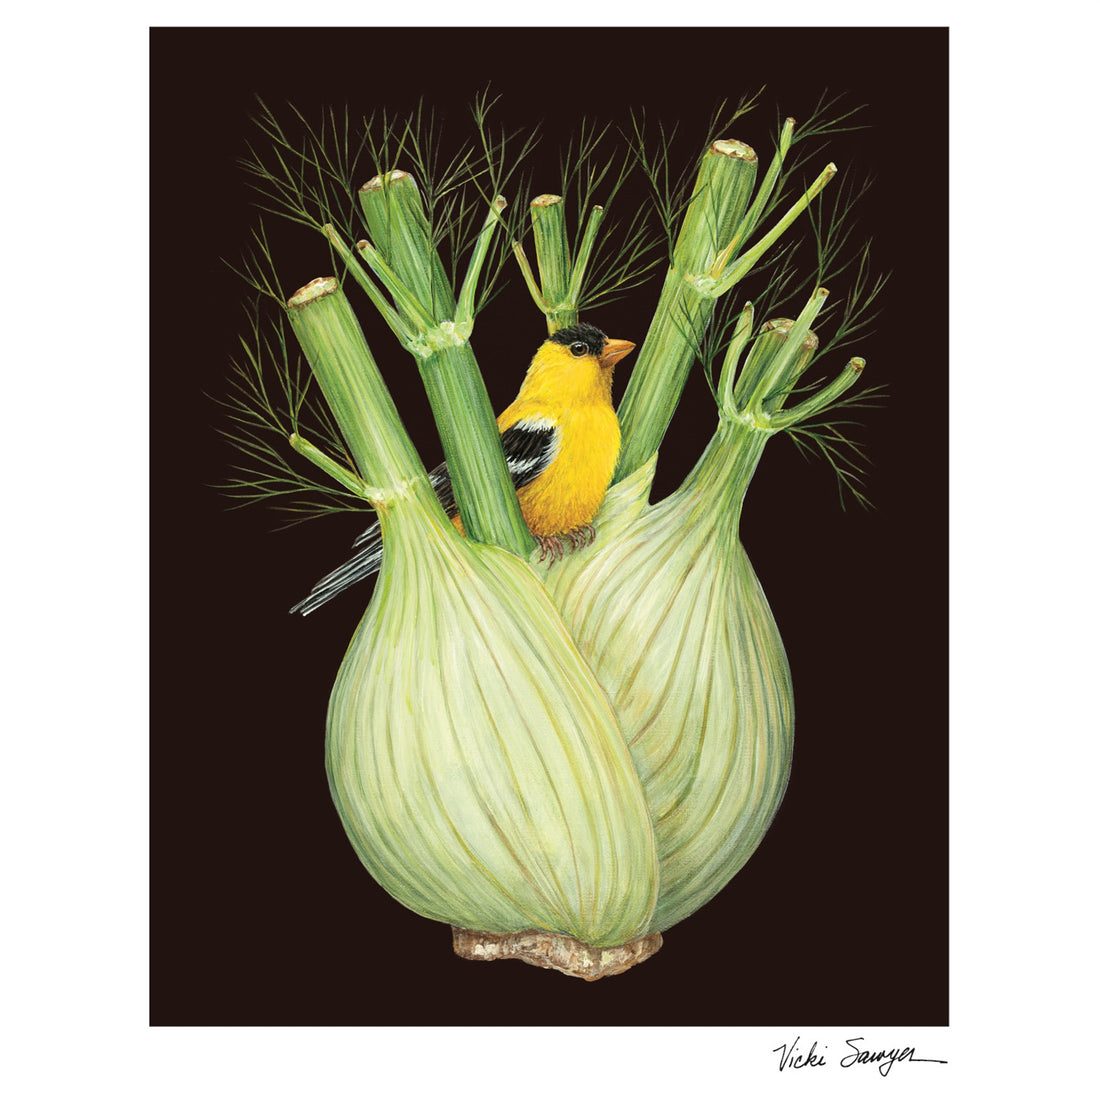 A yellow bird perched on a stalk of fennel, printed by Hester &amp; Cook.